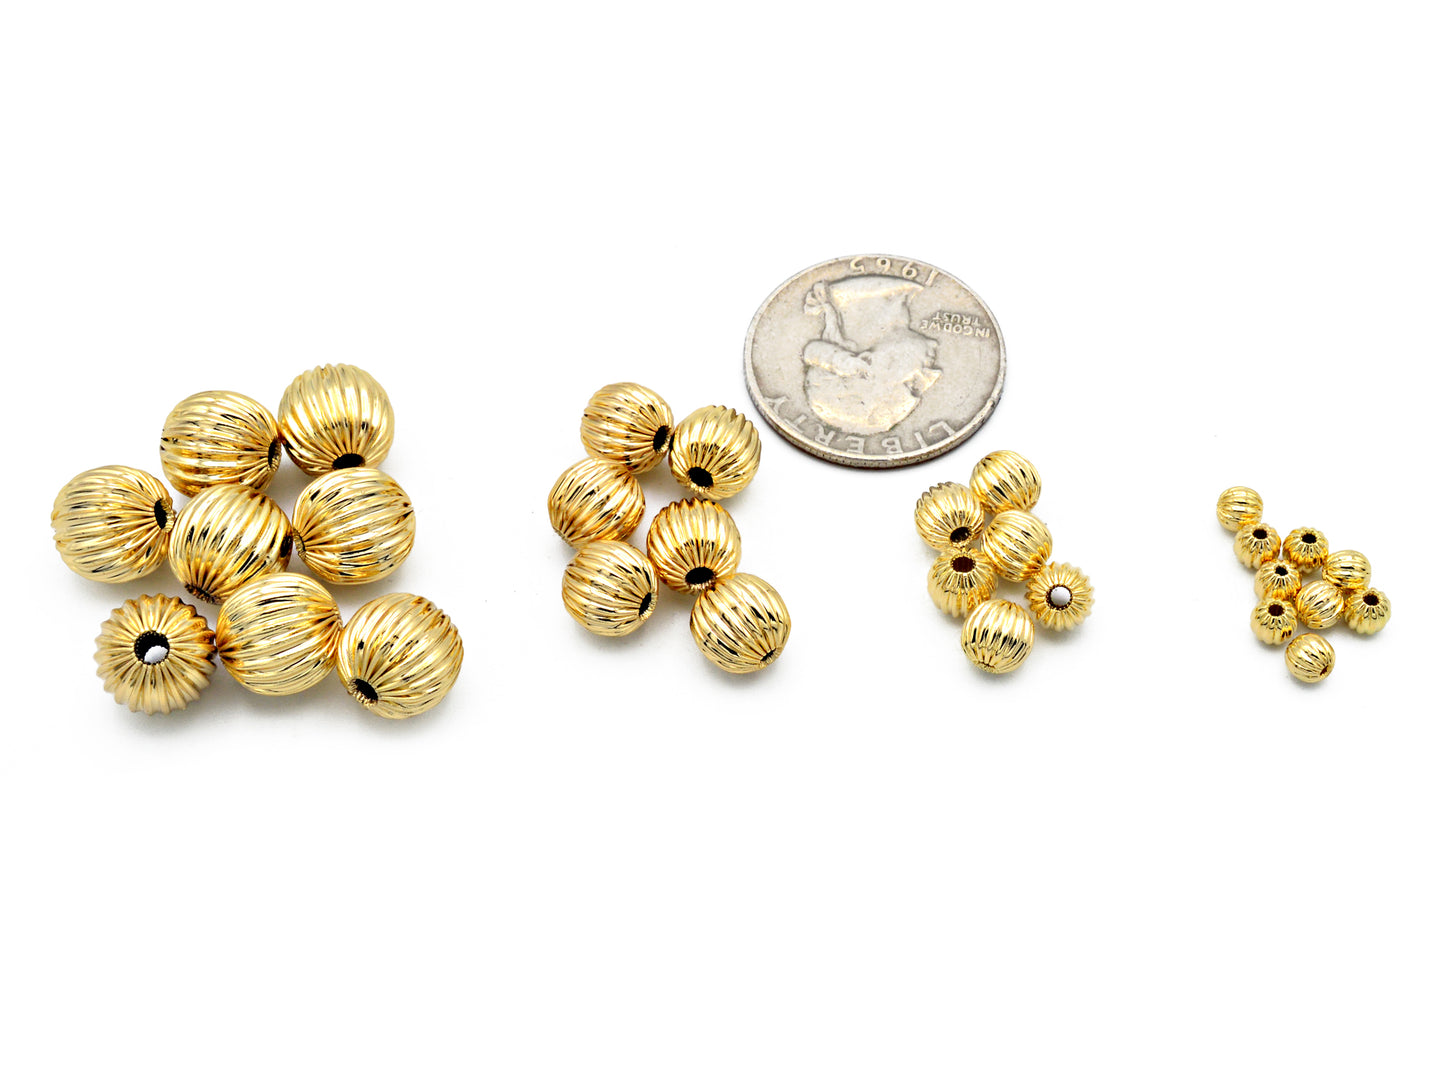 18K/14K Gold Filled Round Beads, Watermelon Ball, Sizes 4mm, 6mm, 8mm,10mm Spacer Findings Beads Jewelry USA Seller and Wholesale 12 PCs/PK Etsy